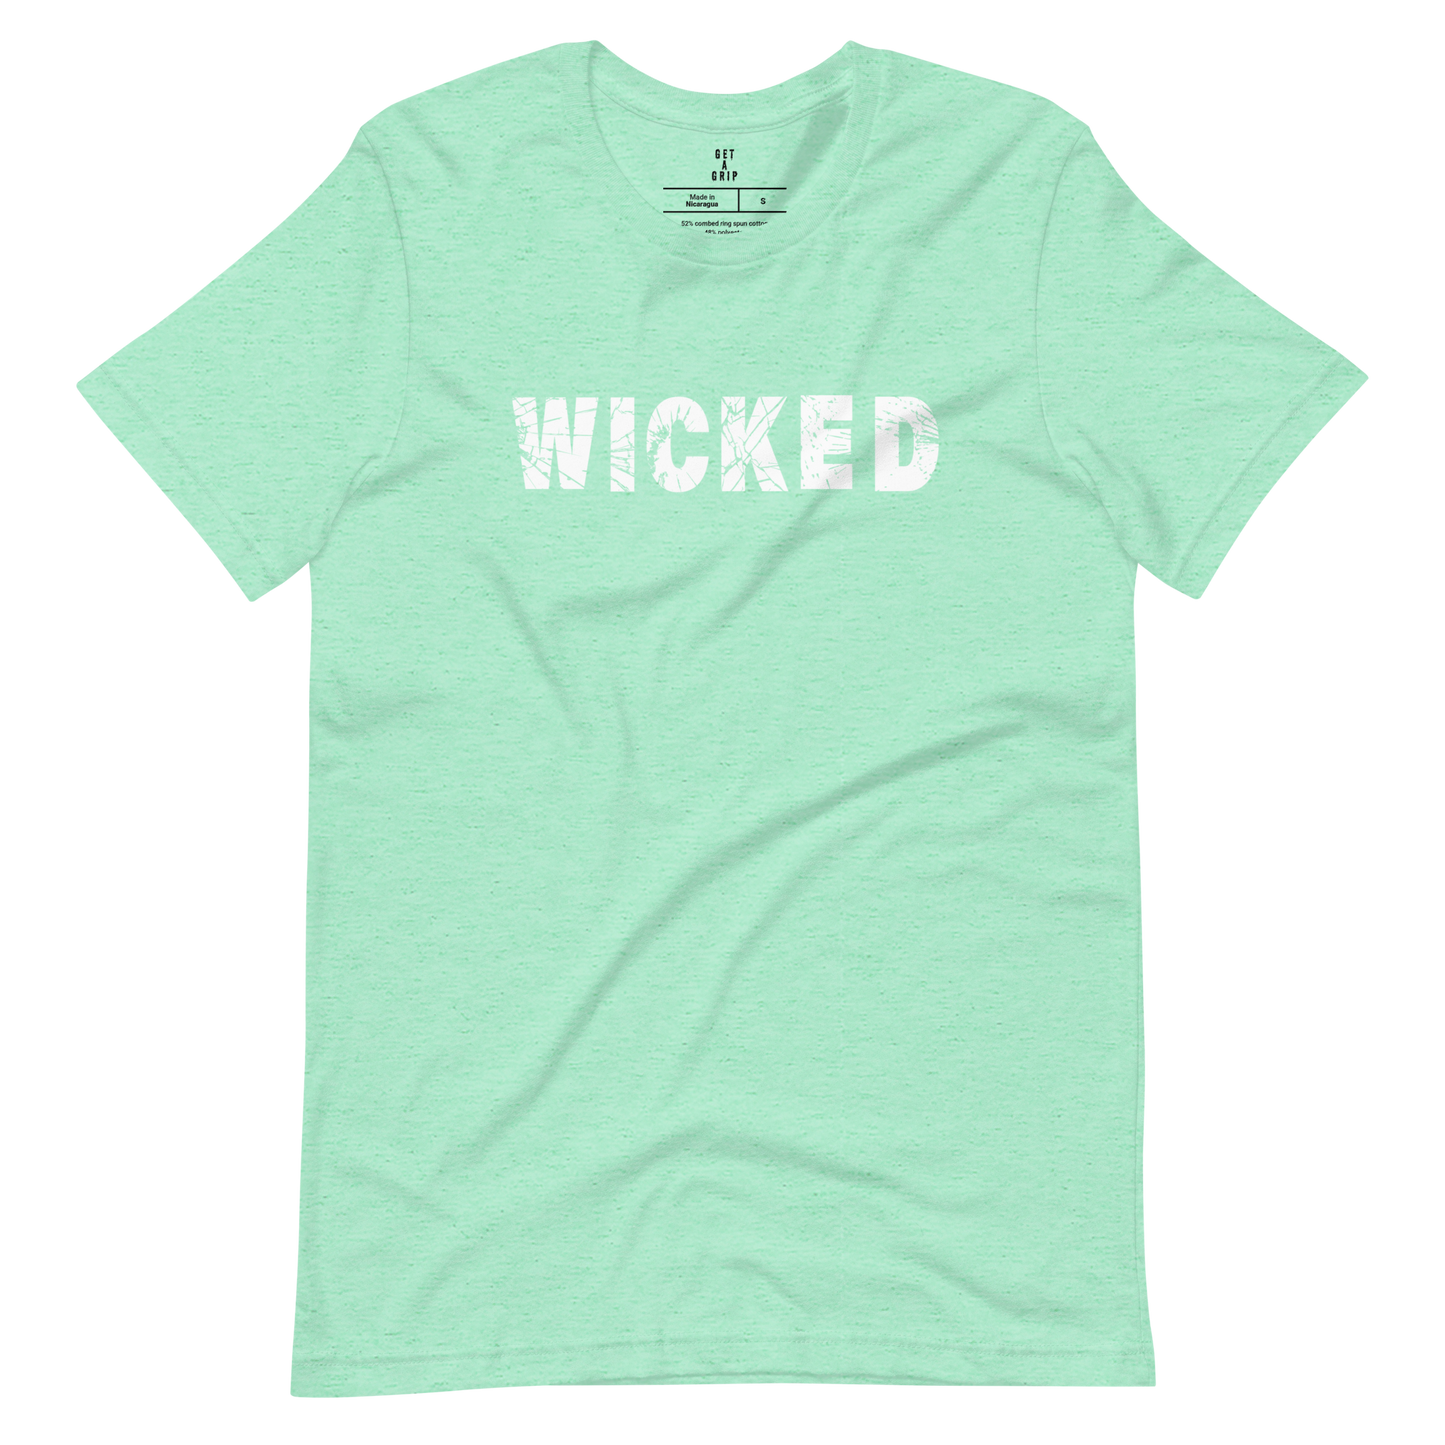 Wicked Tee